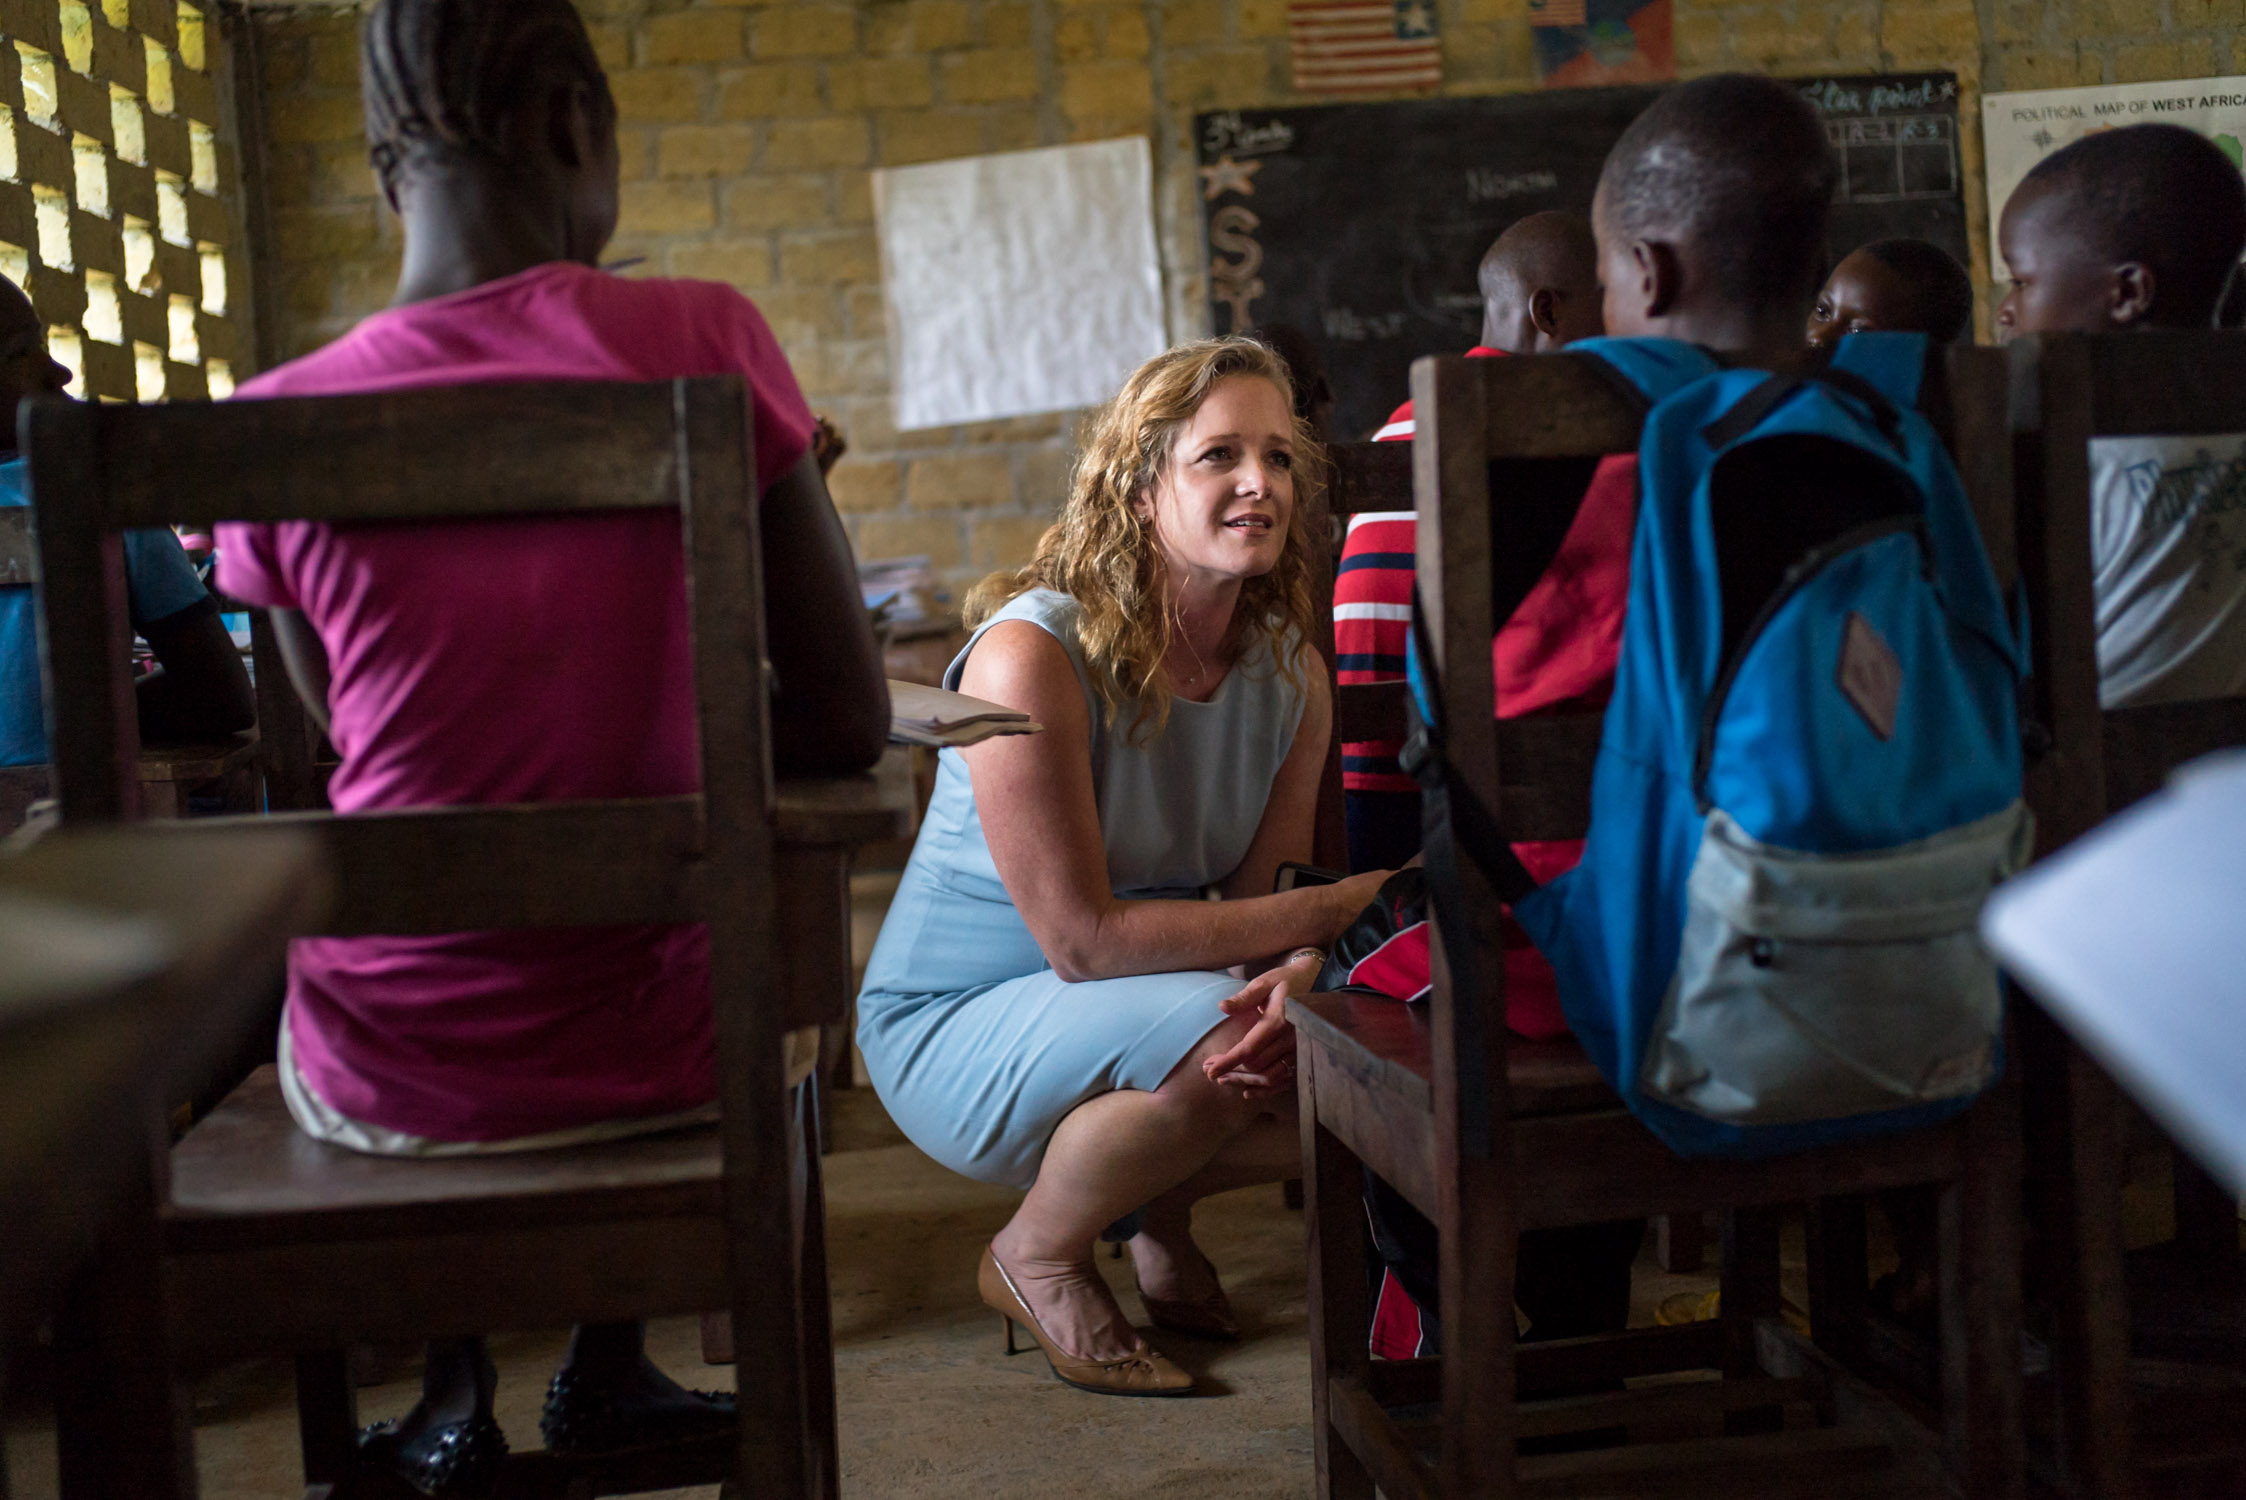  Shannon May, founder of Bridge International Academies, at one of her schools in TK Plantation, a rural community outside of Monrovia, Liberia. September 26, 2016. TK Plantation, Liberia.&nbsp; 